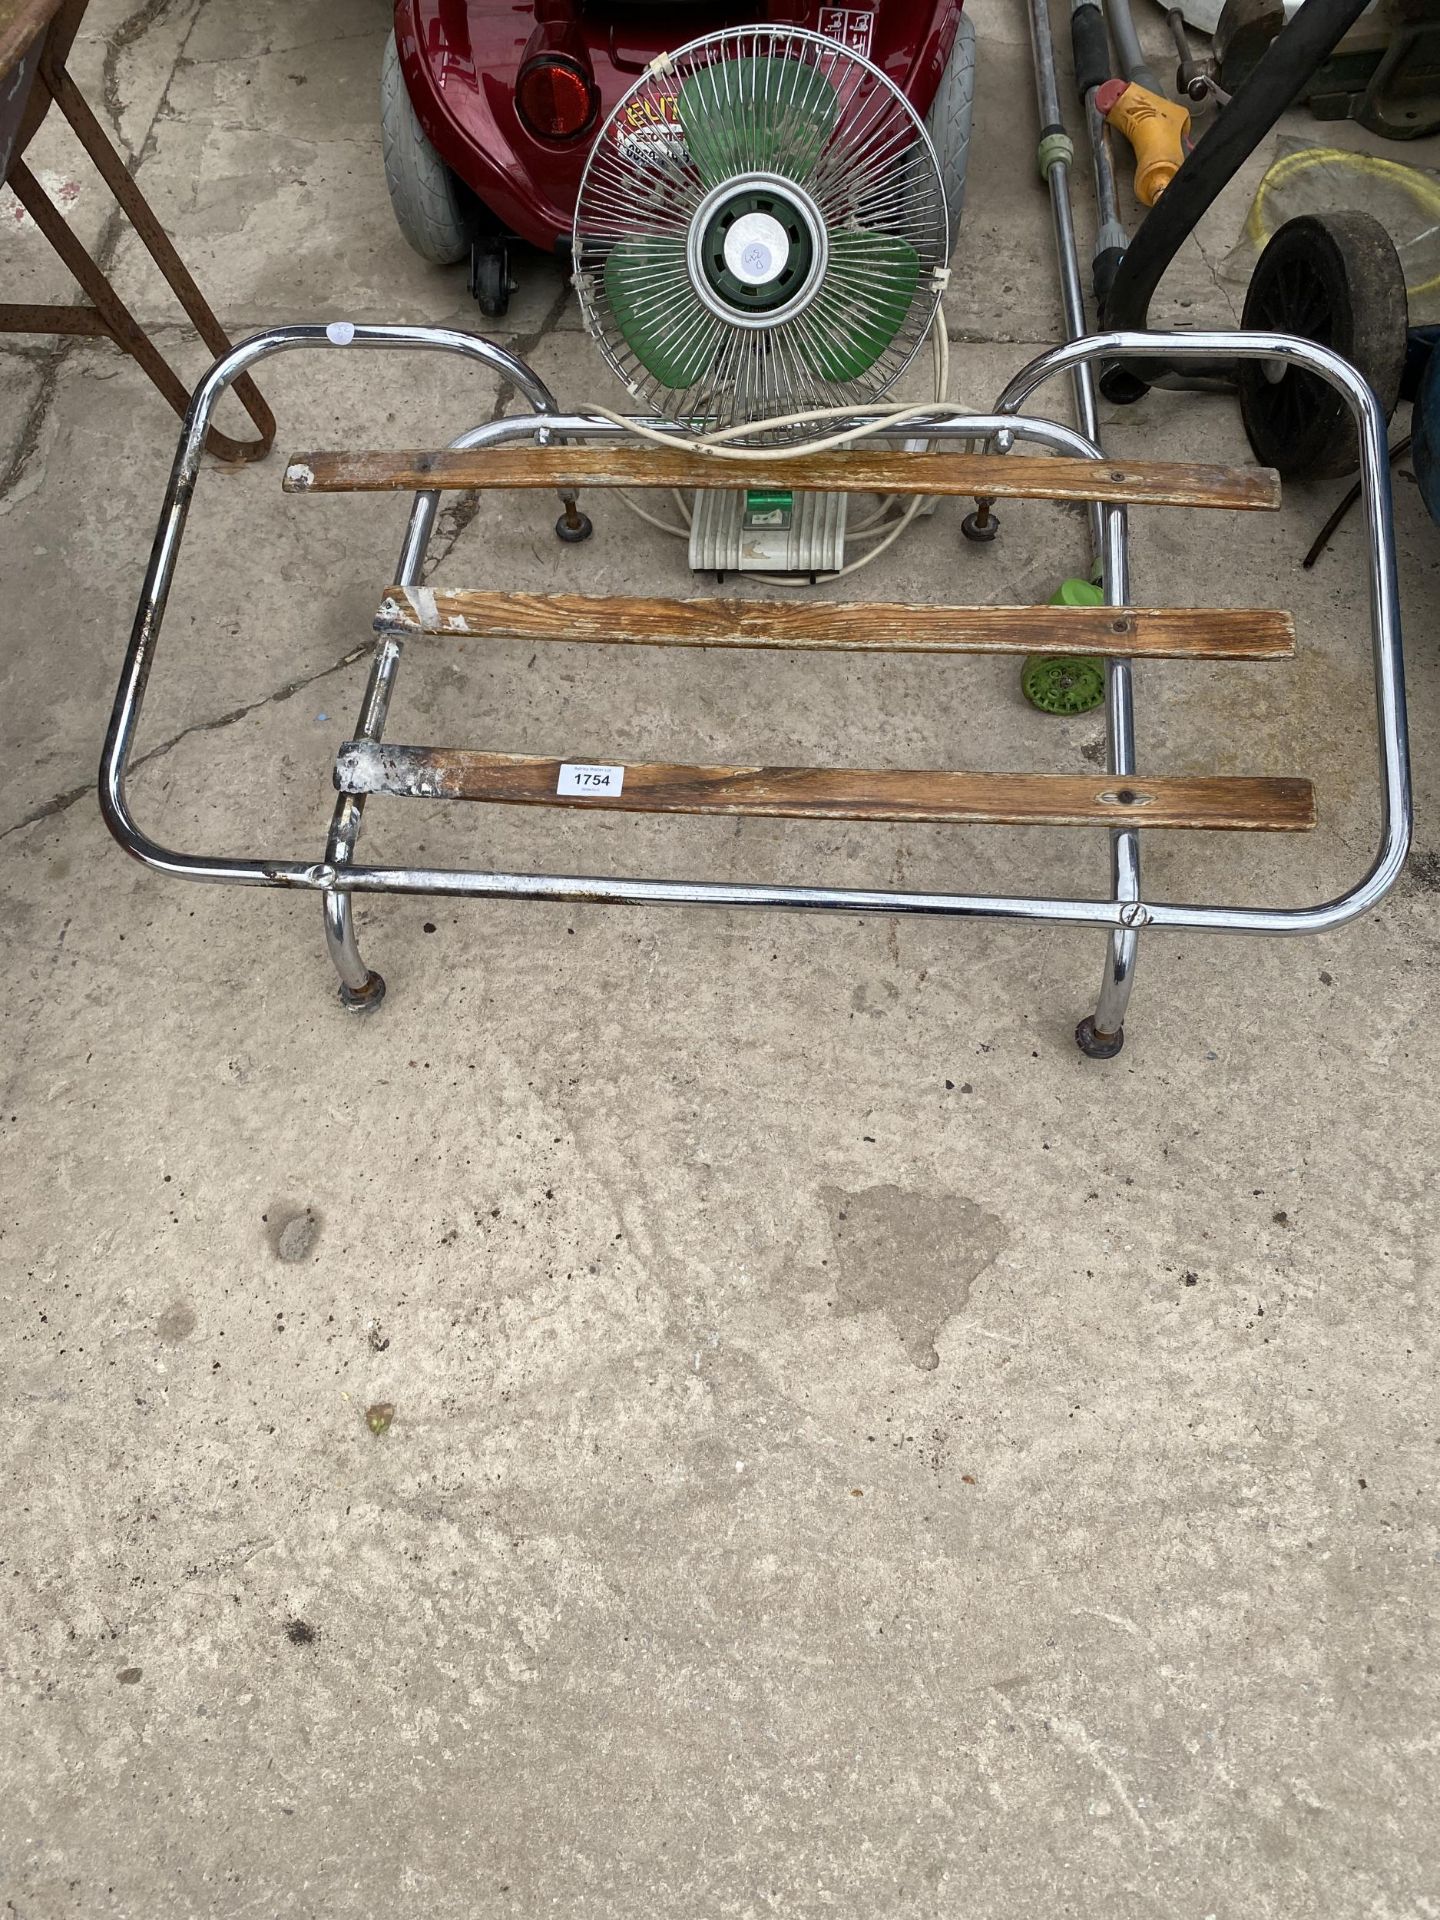 A VINTAGE VEHICLE RACK (BELIEVED TO FIT AN MG MIDGET) AND A DESK FAN